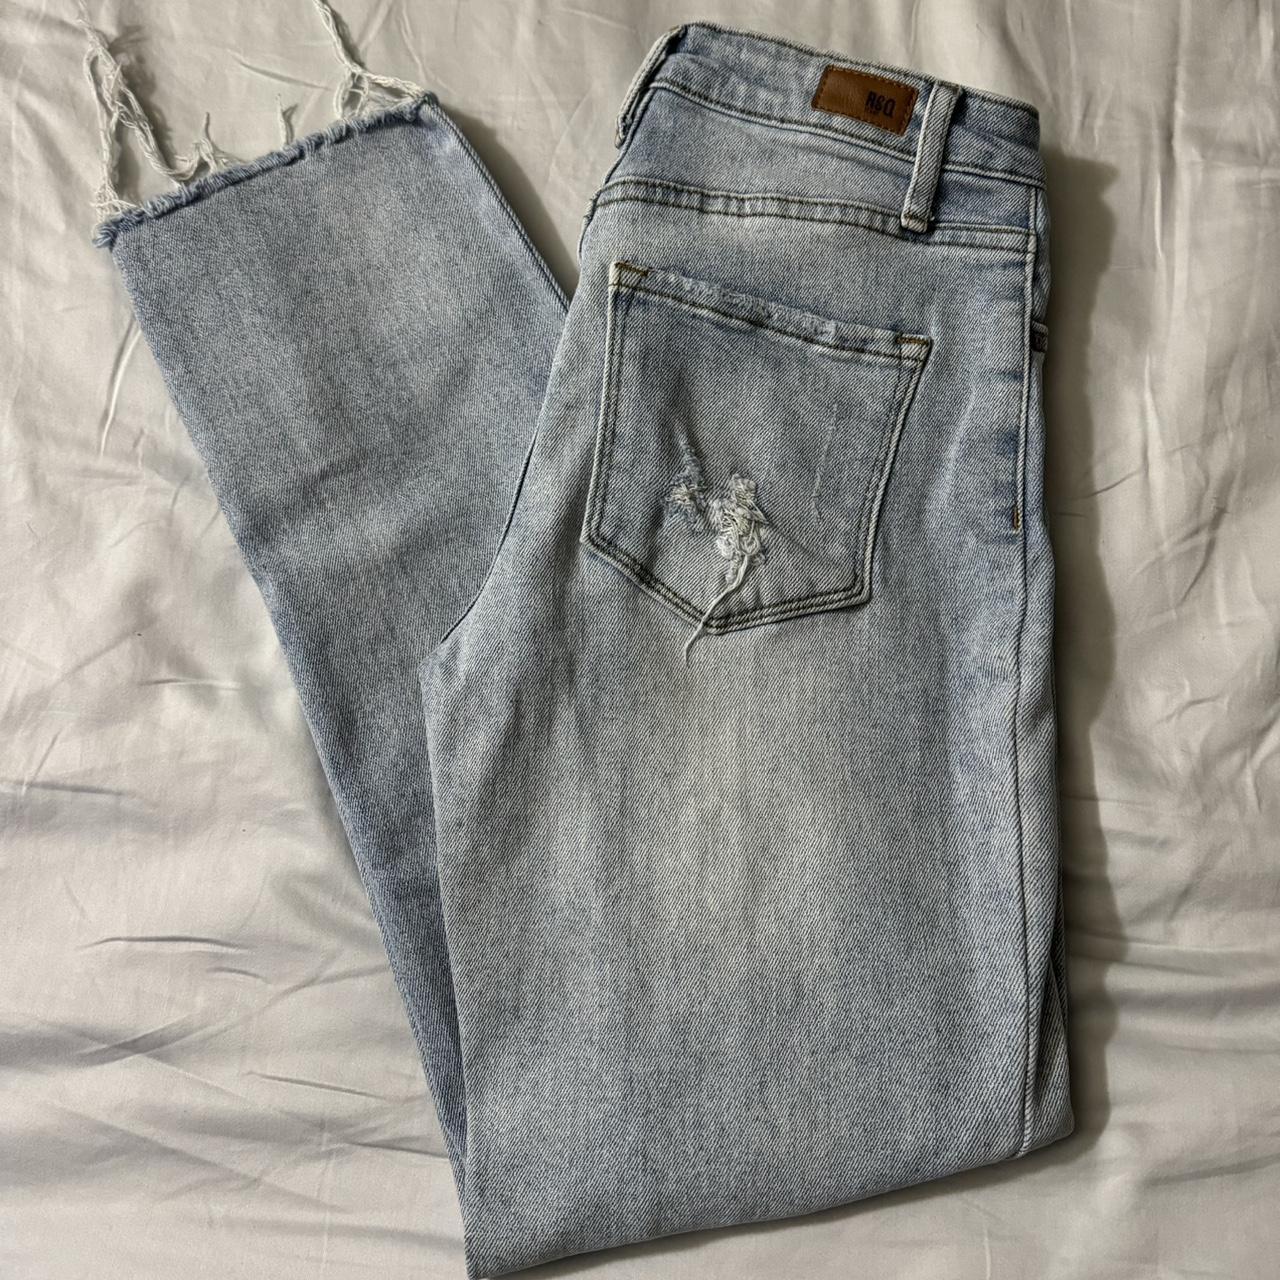 RSQ jeans from Tilly's size 1 waist 25 #RSQ #jeans - Depop